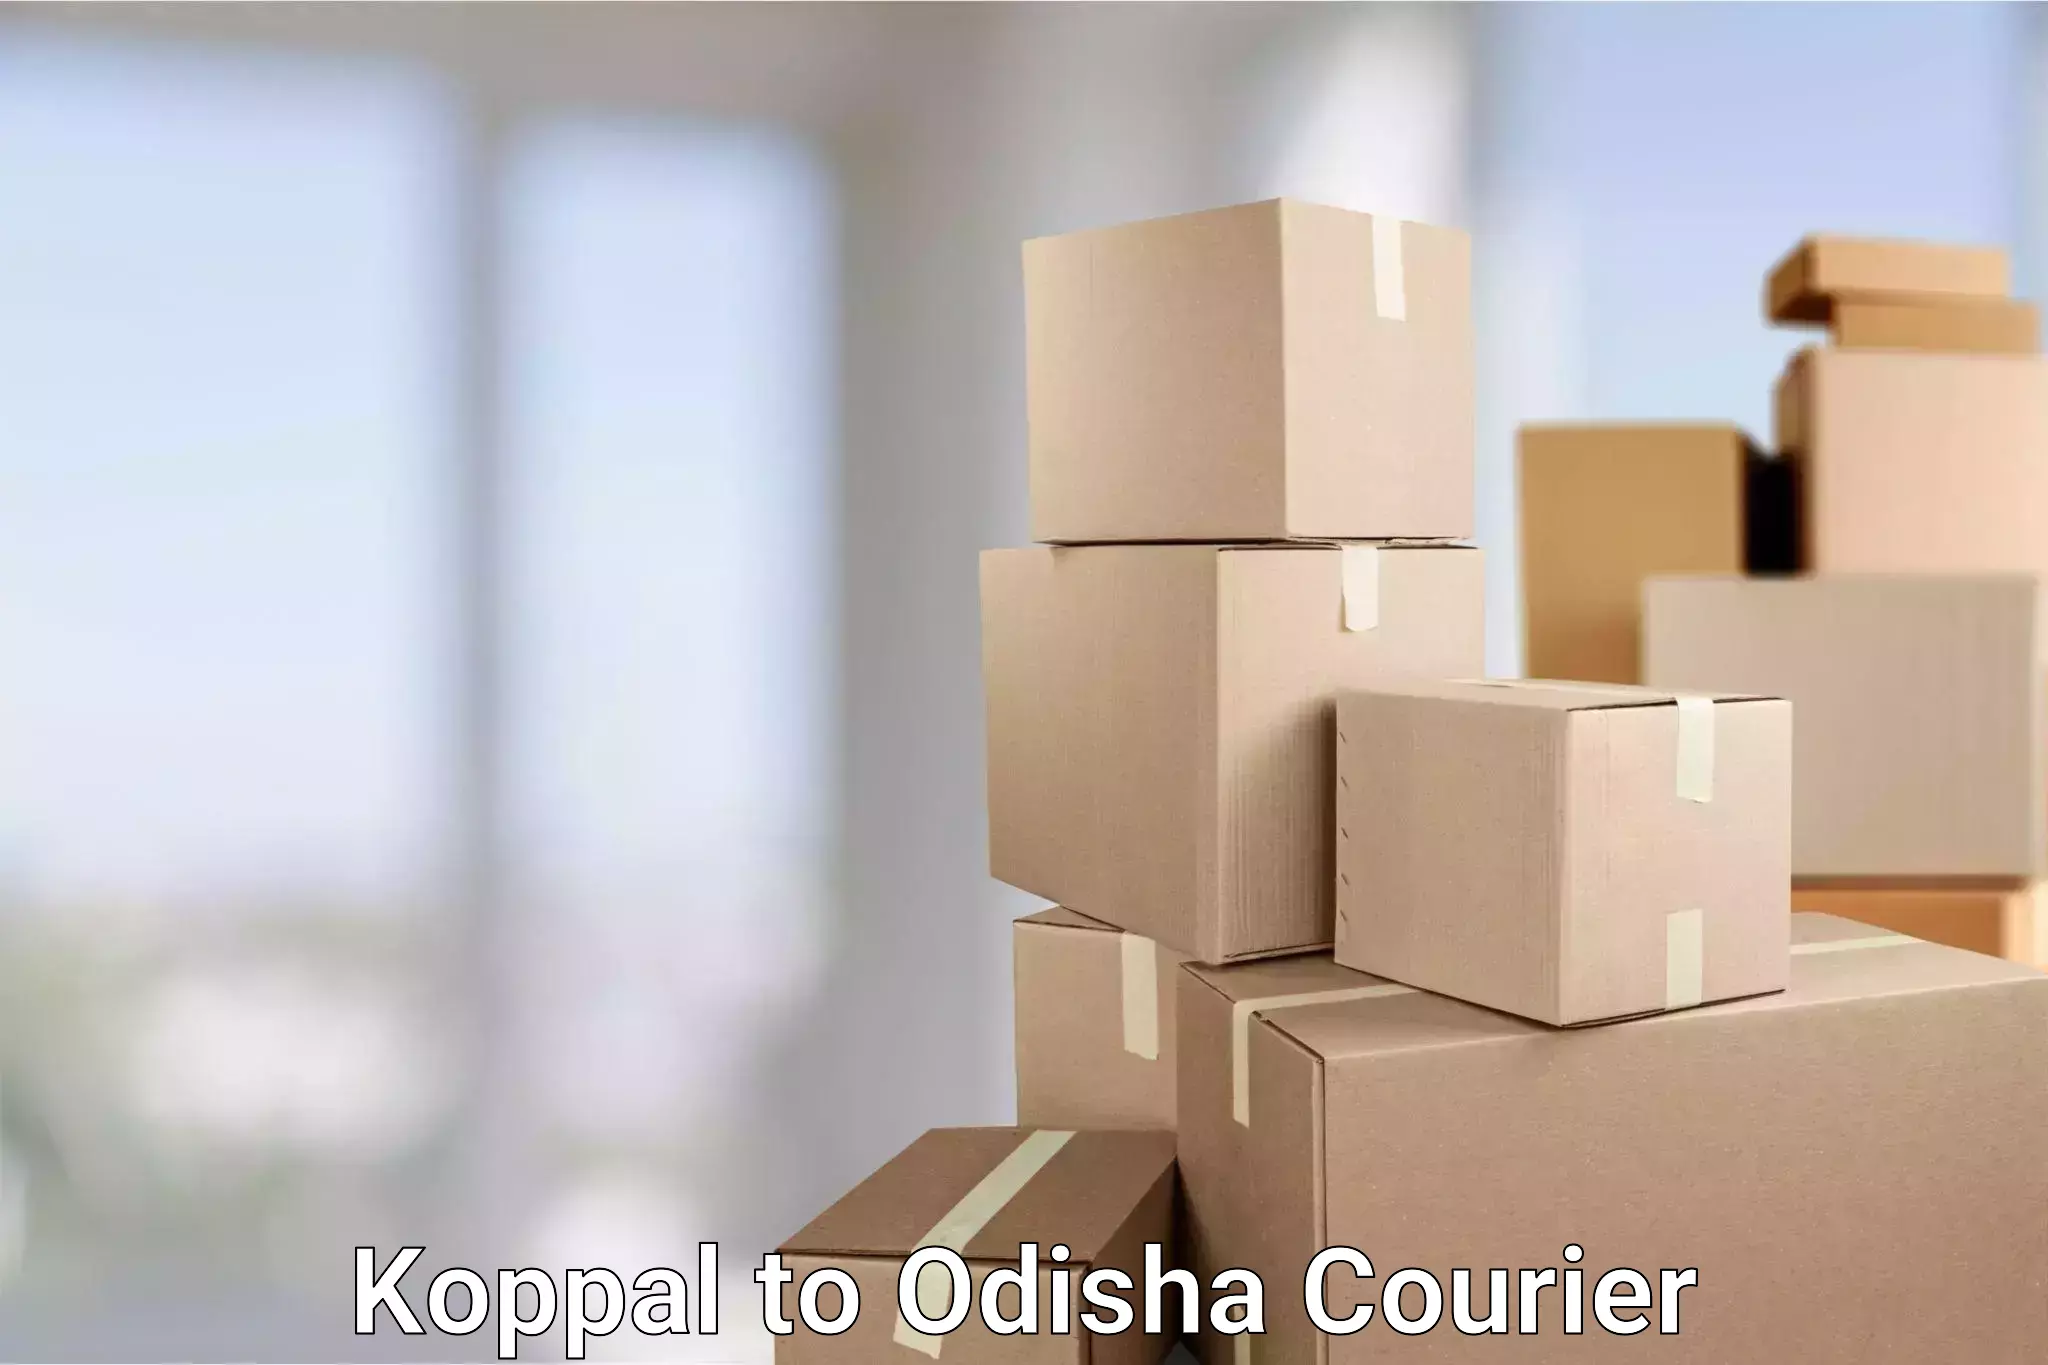 Round-the-clock parcel delivery in Koppal to Jagatpur